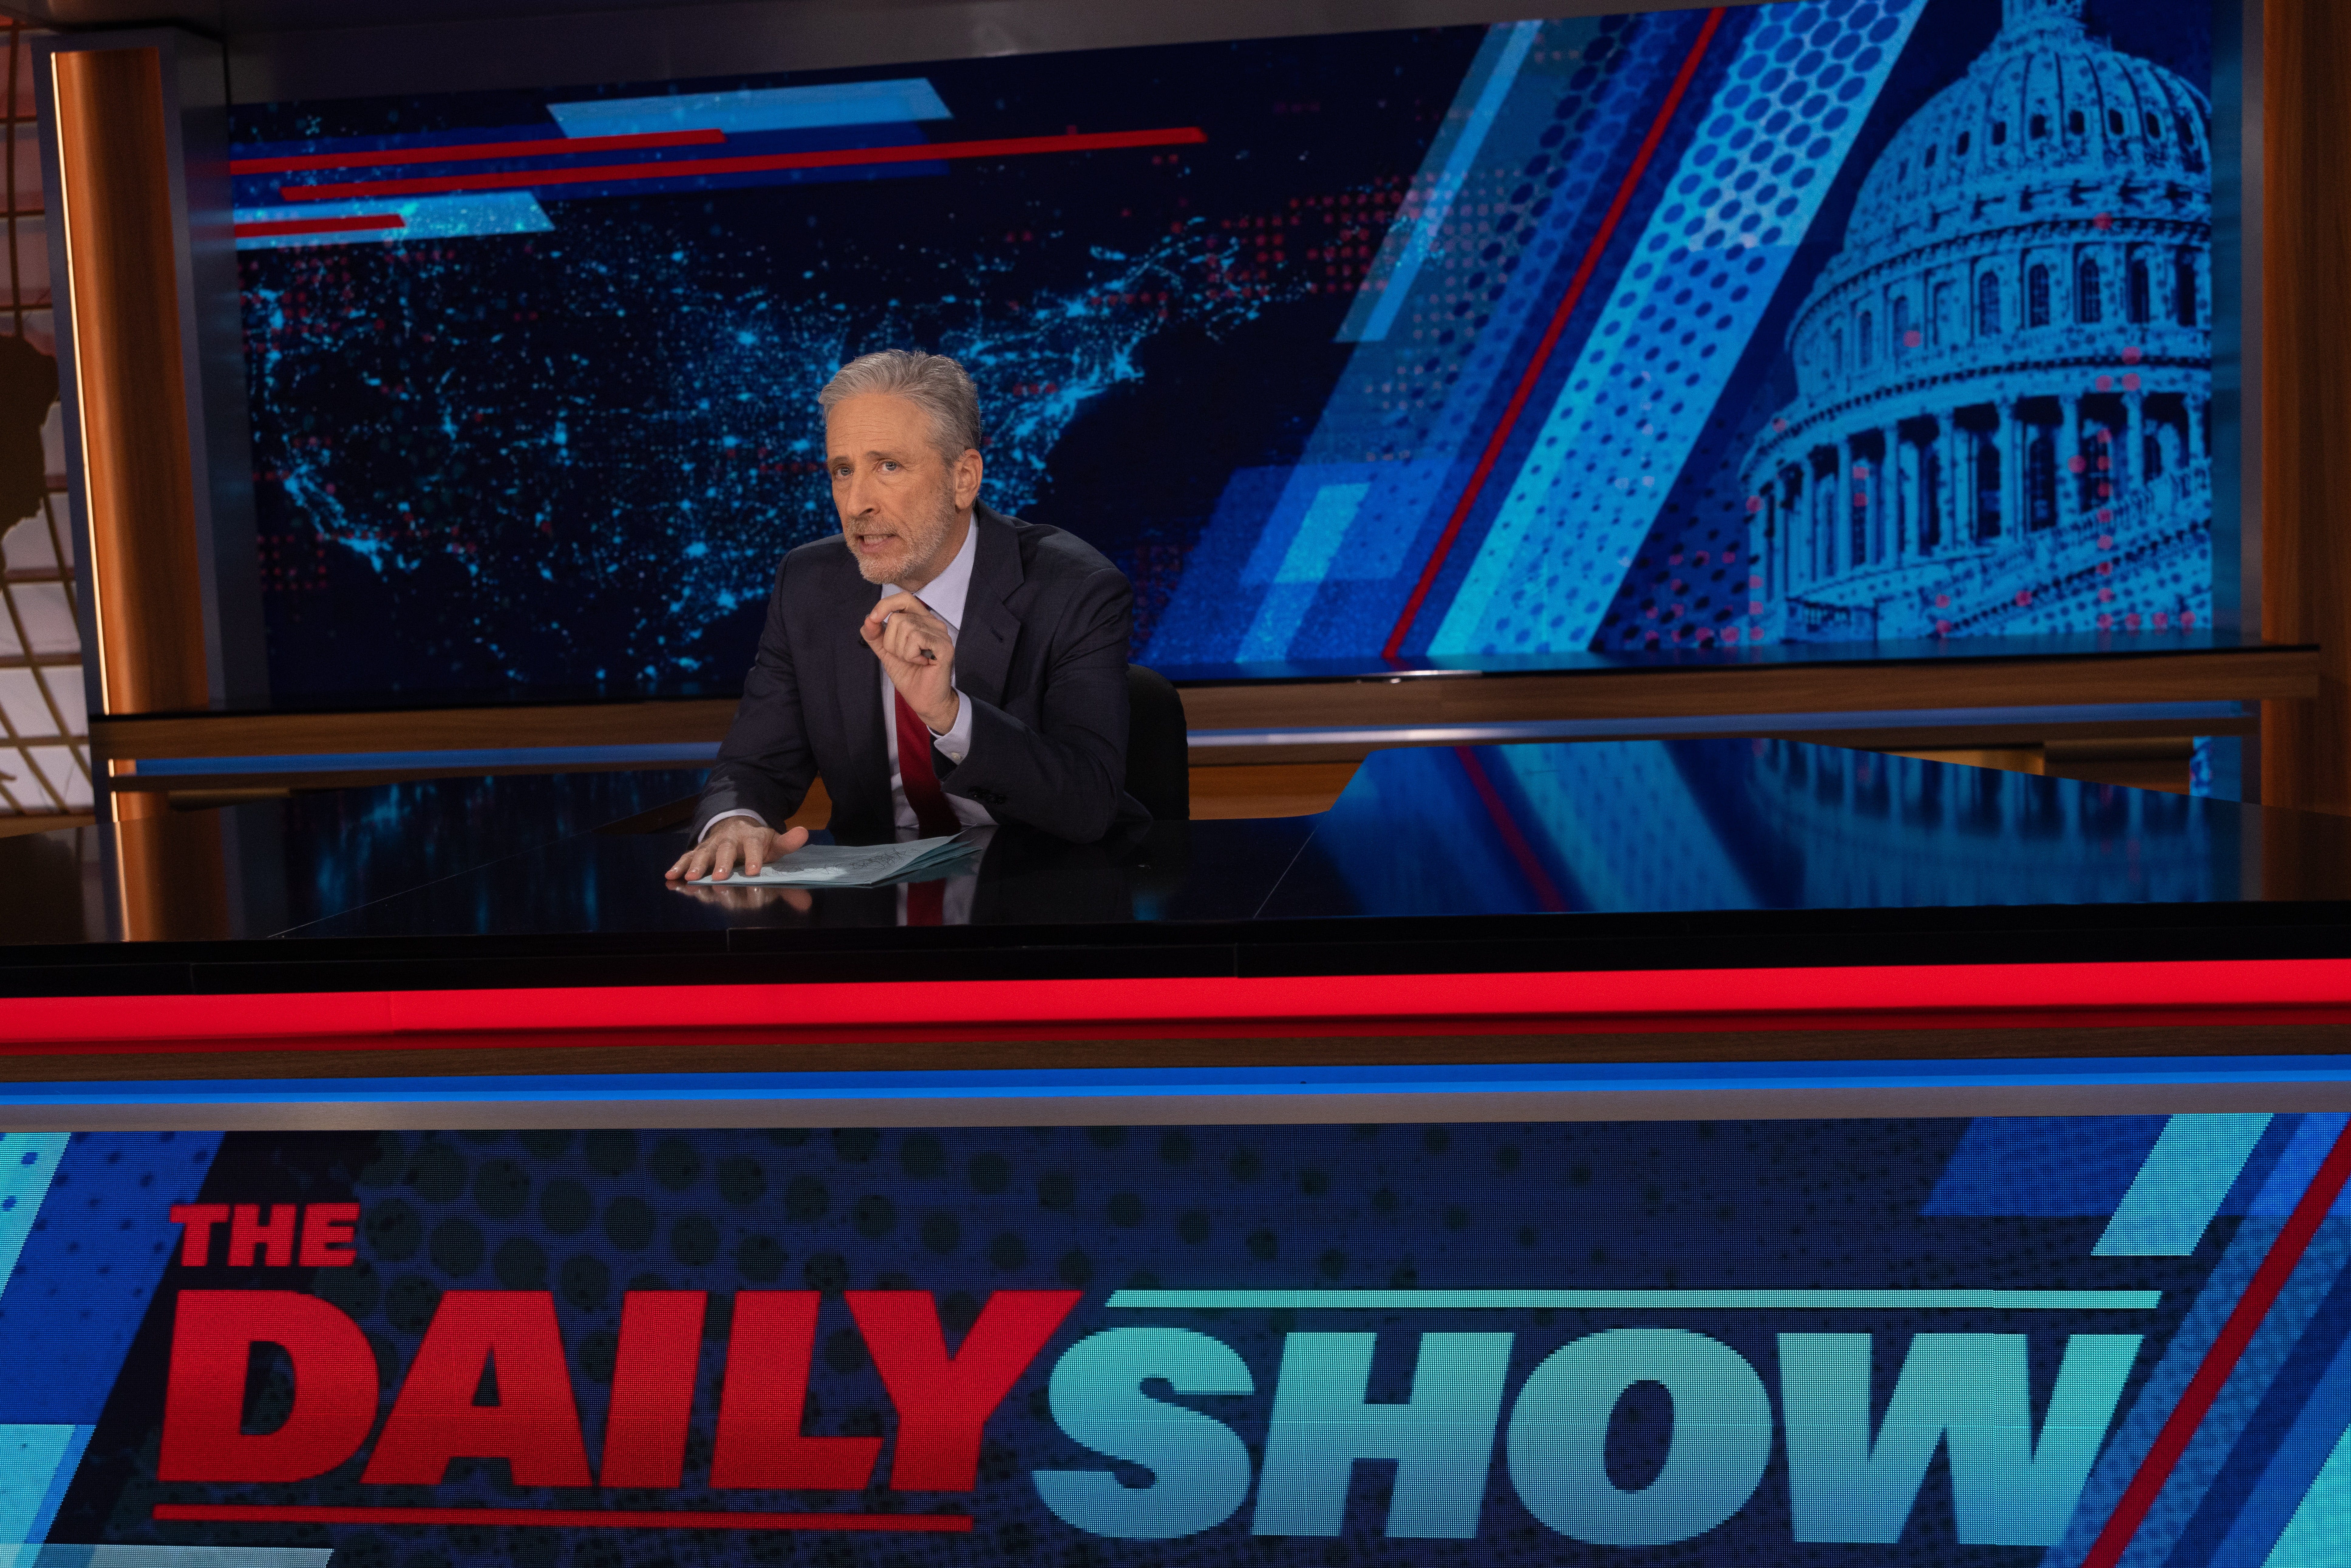 Want to watch a taping of 'The Daily Show' during the RNC in Milwaukee? Here's how.